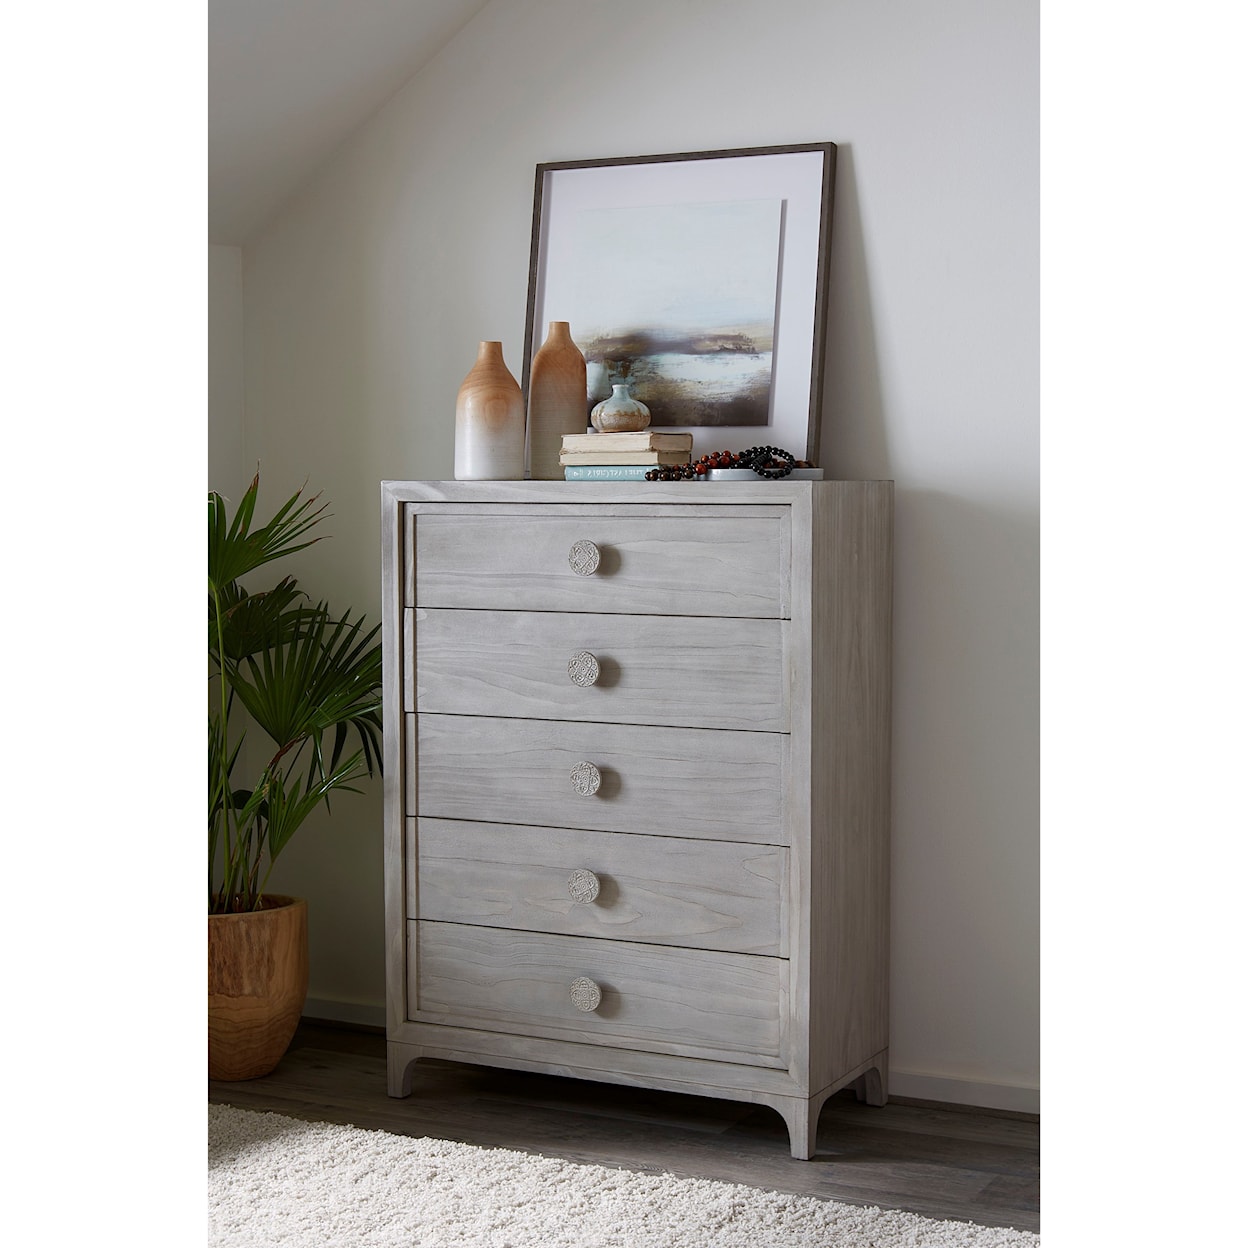 Modus International Boho Chic 5-Drawer Chest in Washed White